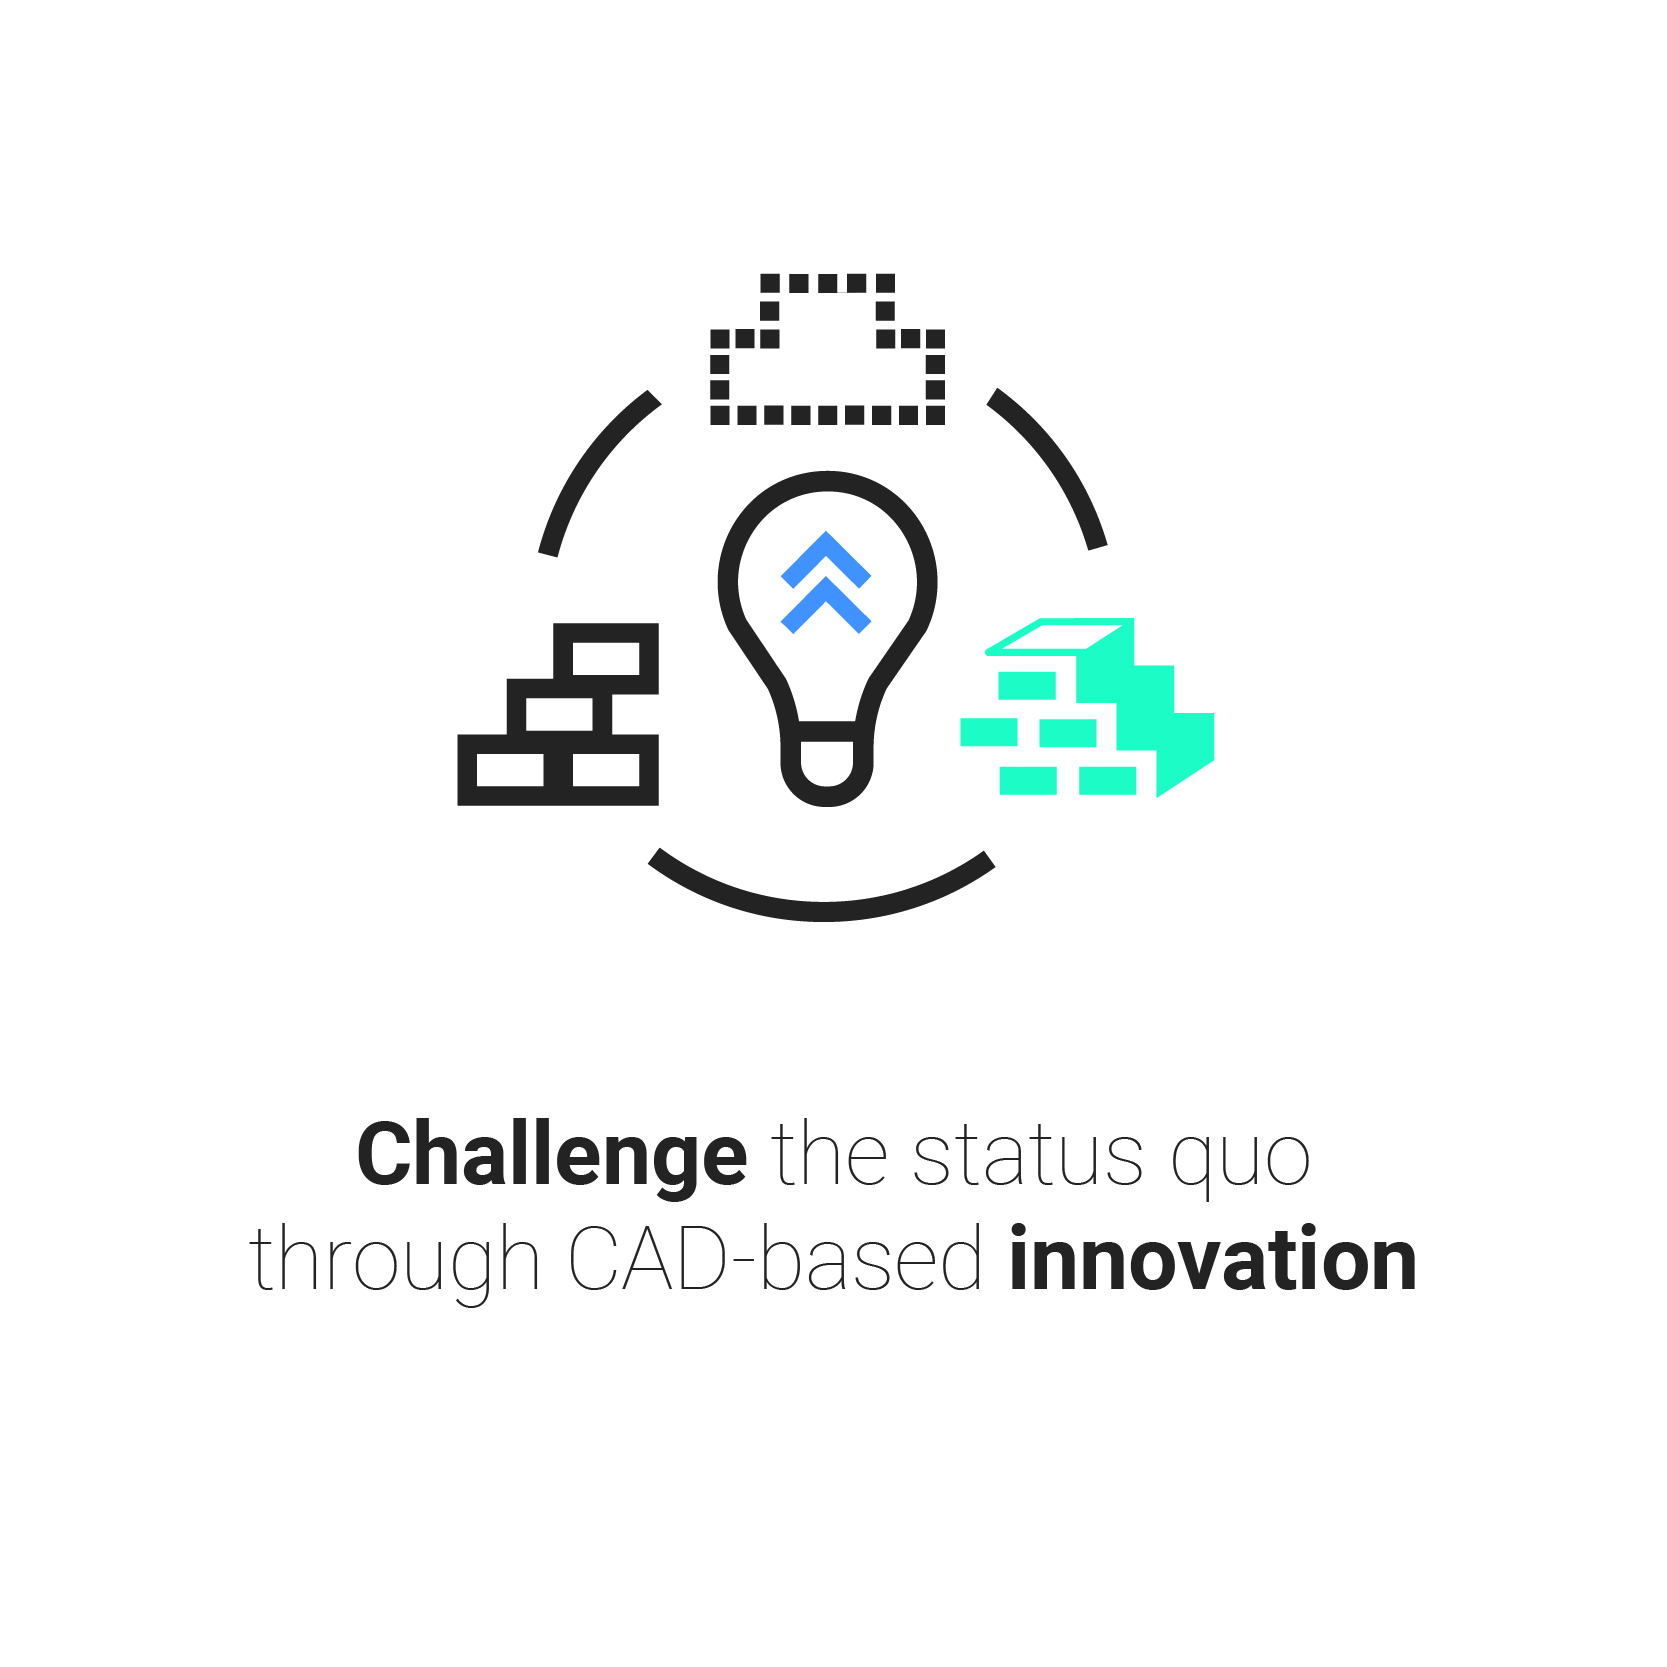 Challenge the status quo through CAD-based innovation